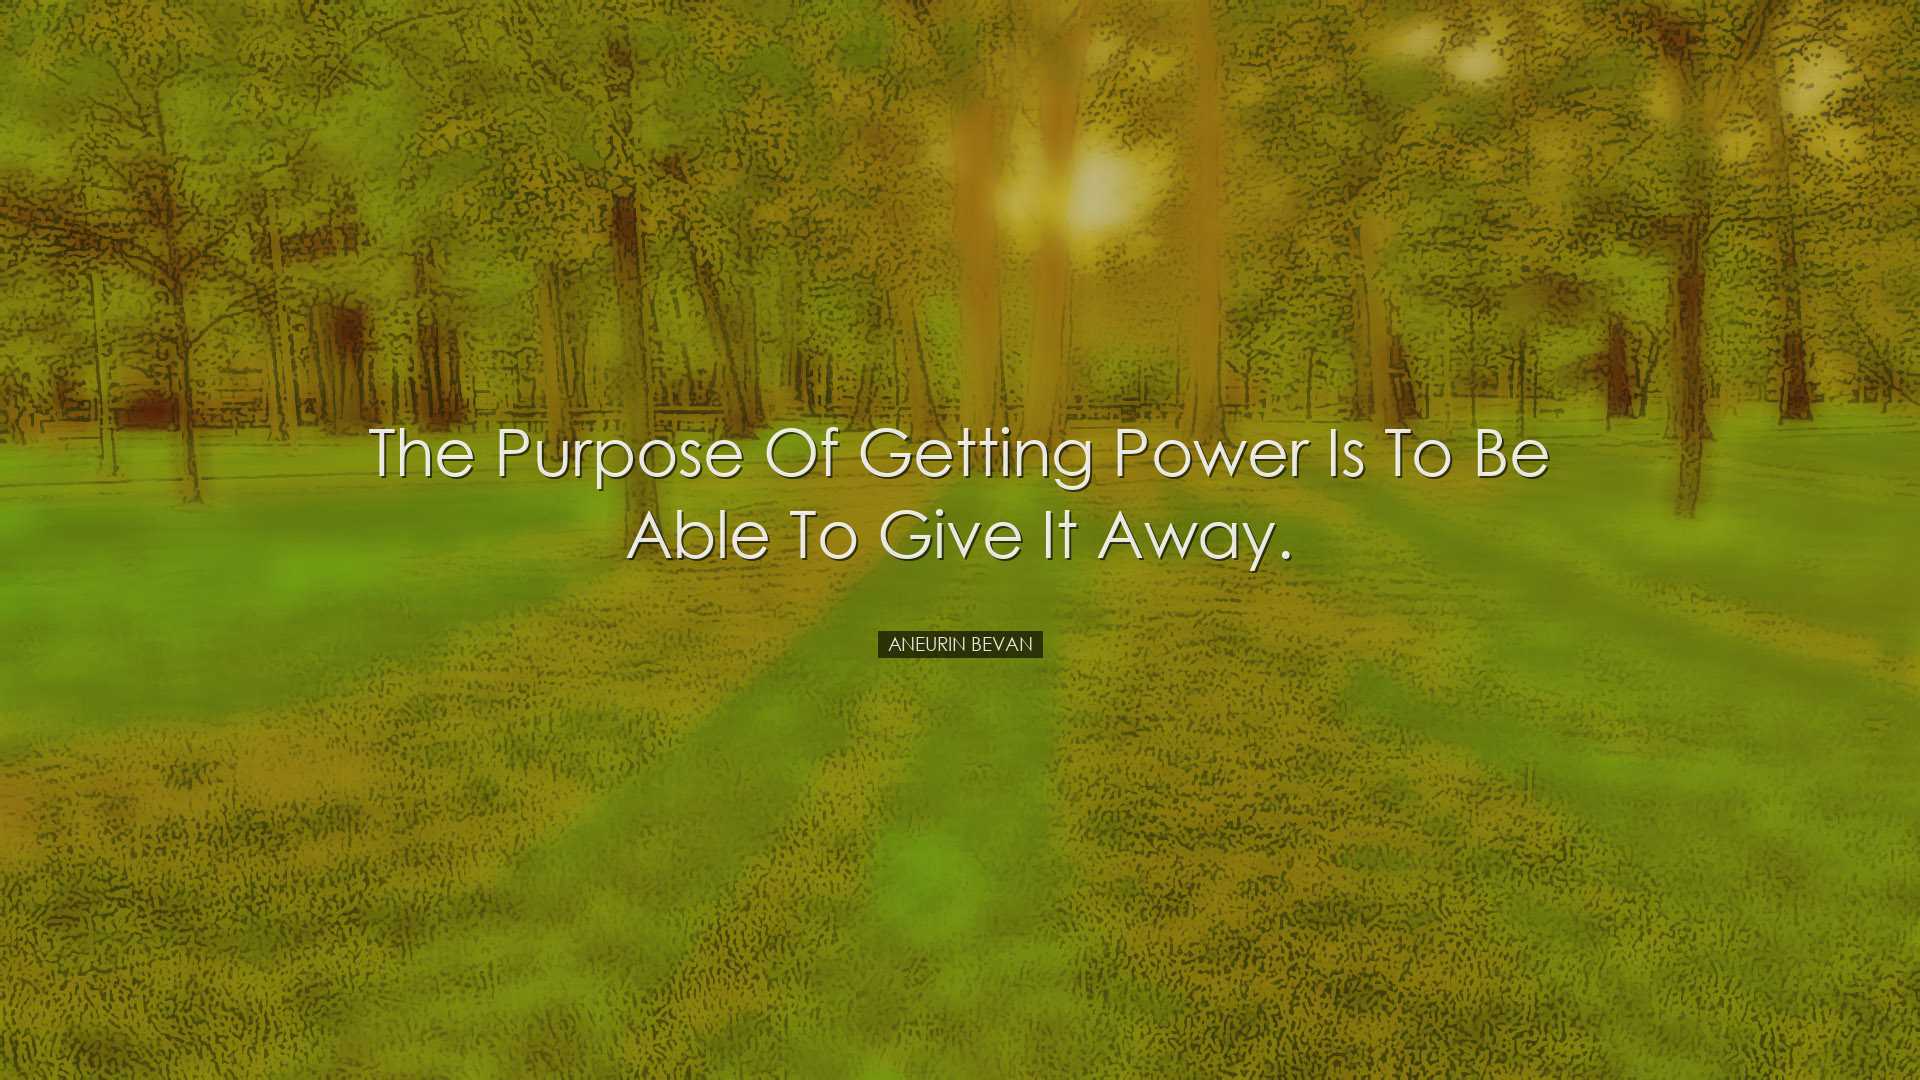 The purpose of getting power is to be able to give it away. - Aneu